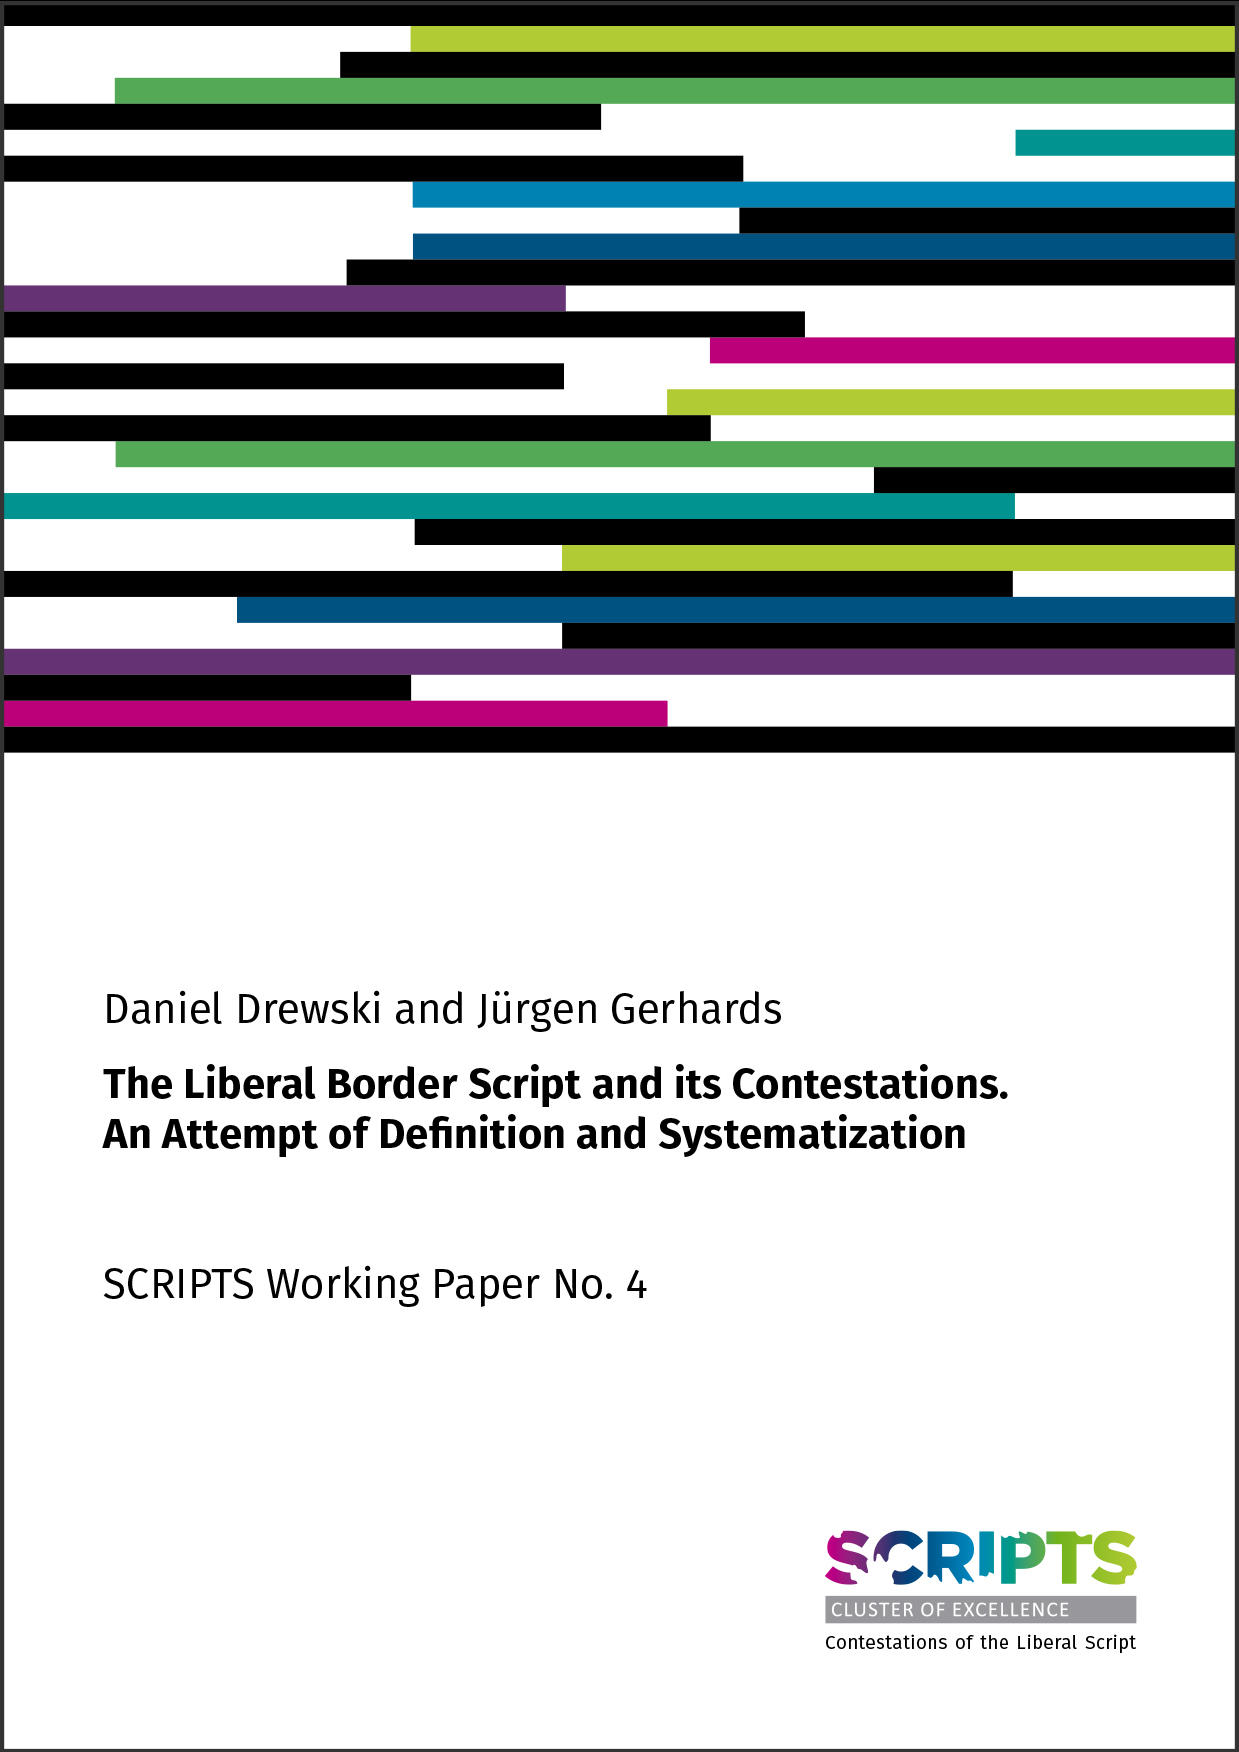 SCRIPTS_Working_Paper_4_Cover